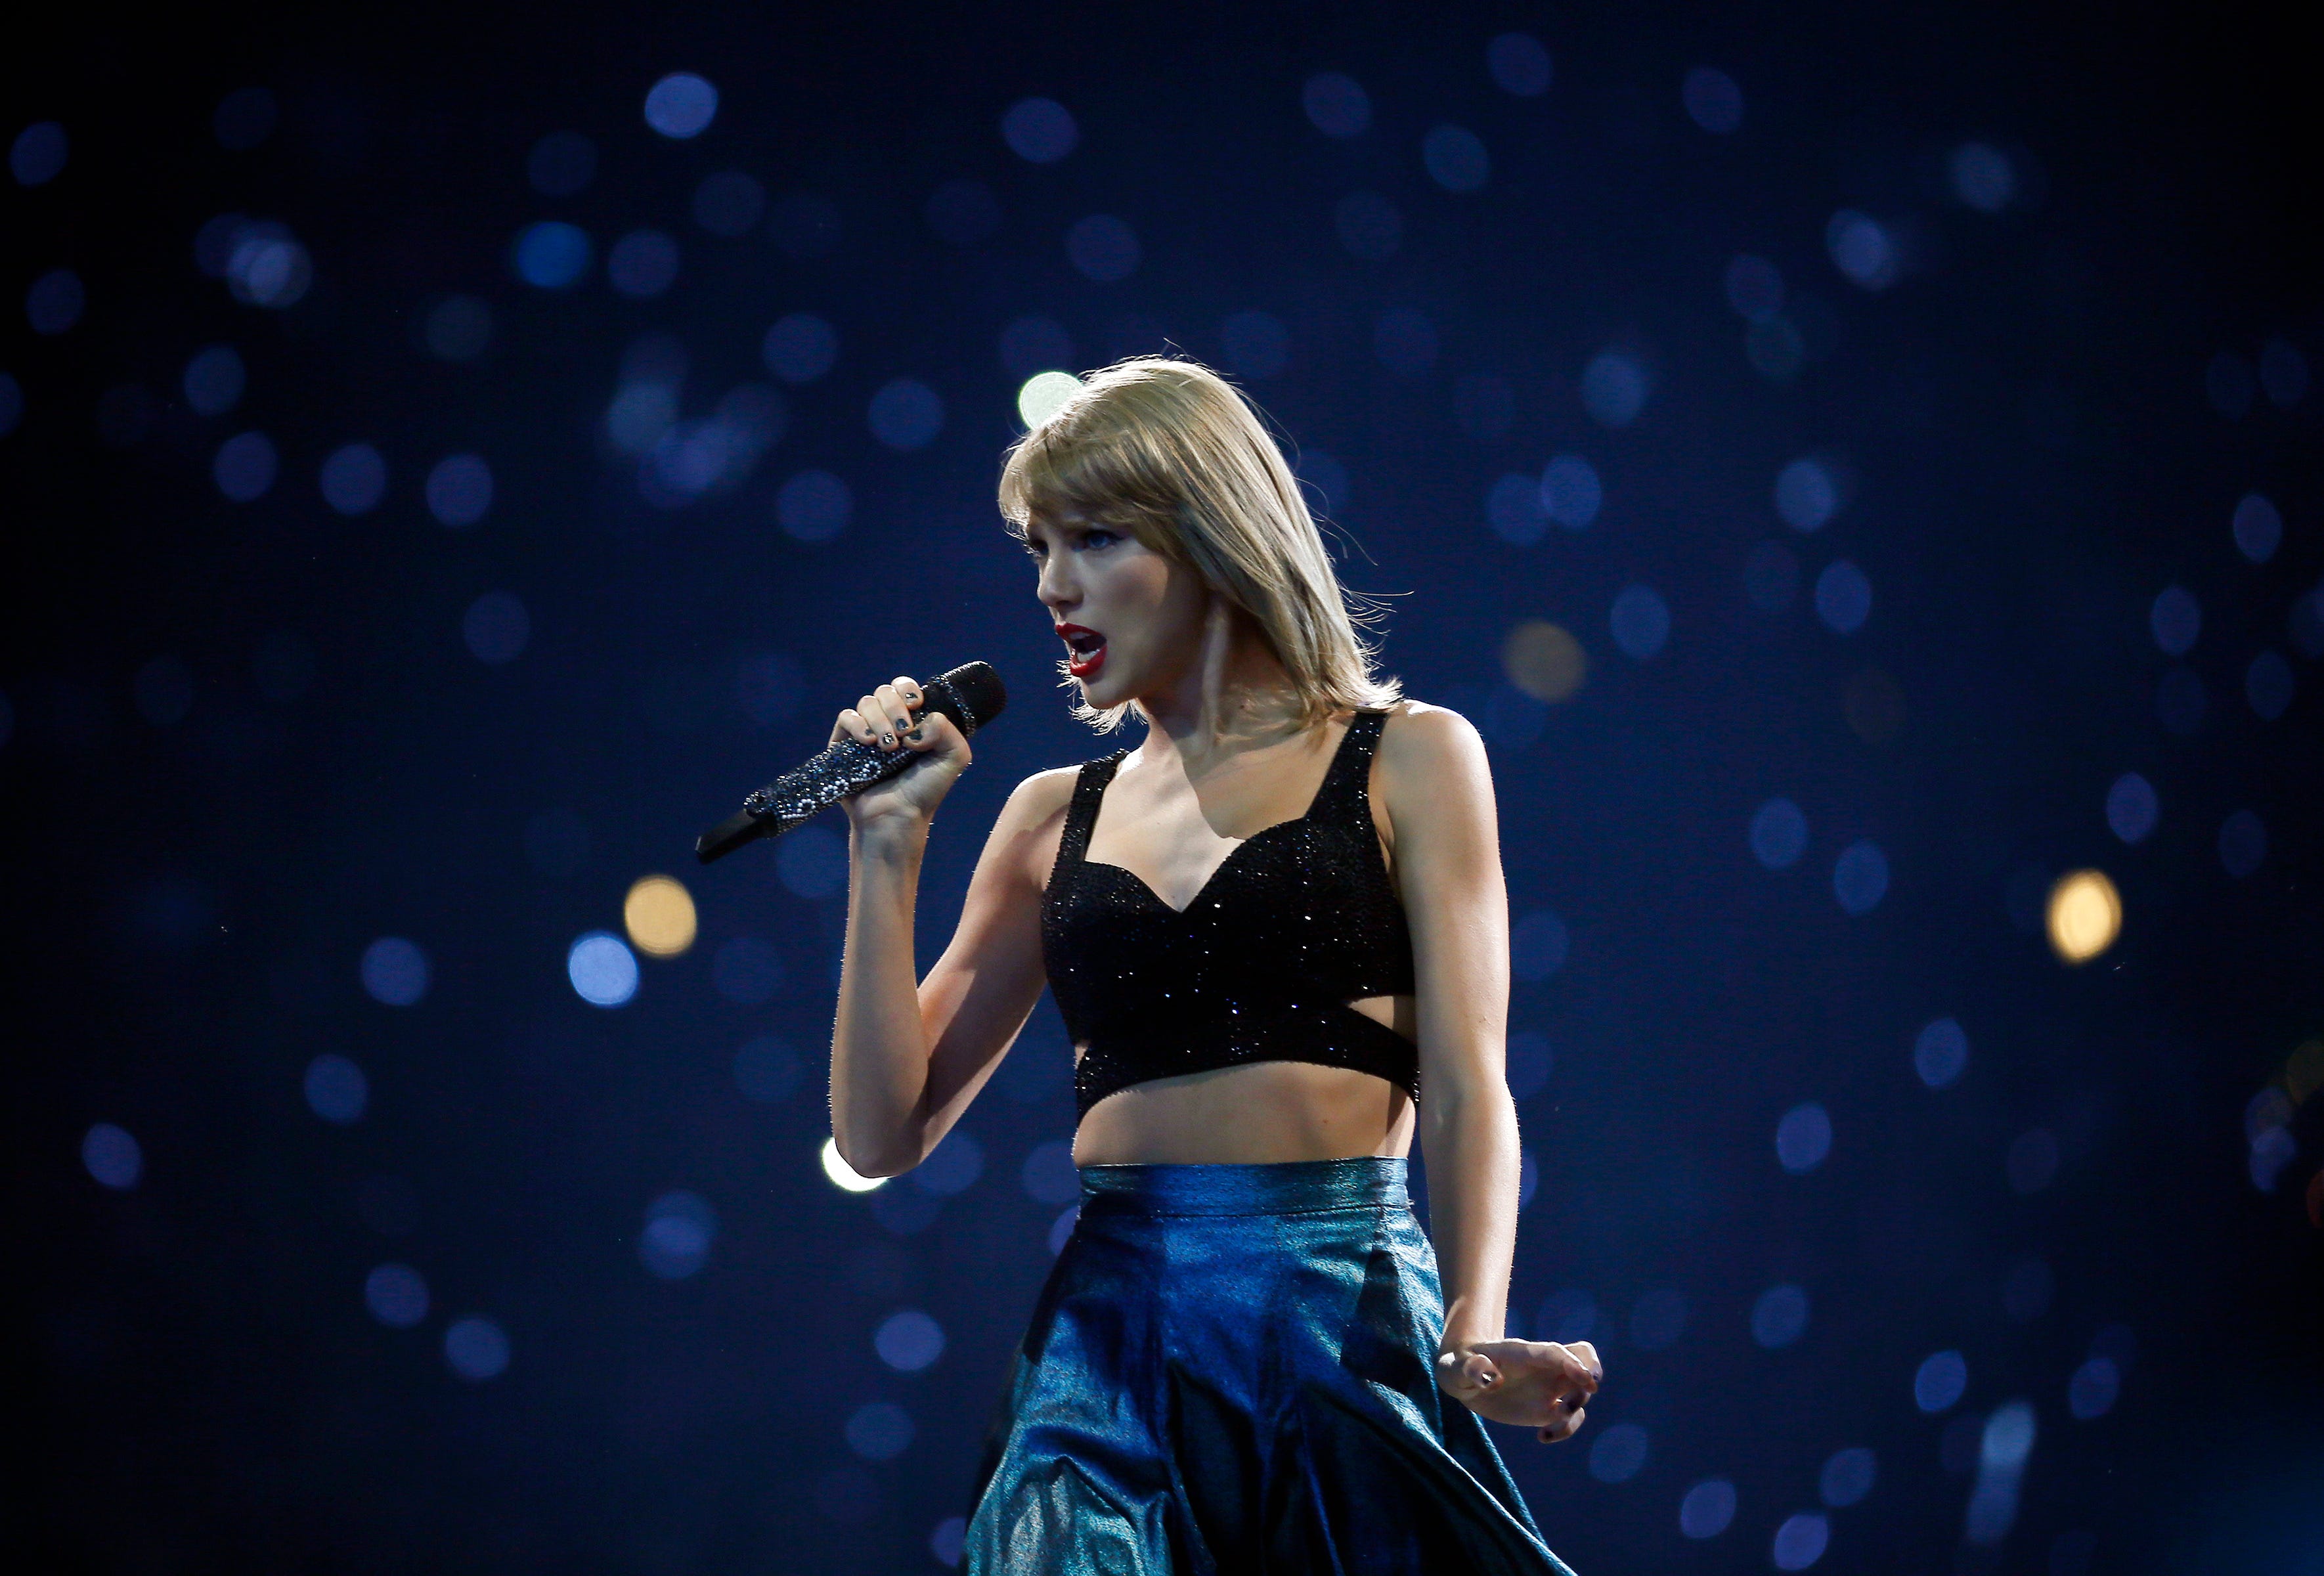 Taylor Swift performs the first of two shows on her 1989 World Tour at Nationwide Arena in Columbus on Sept. 17, 2015. (Adam Cairns / The Columbus Dispatch)